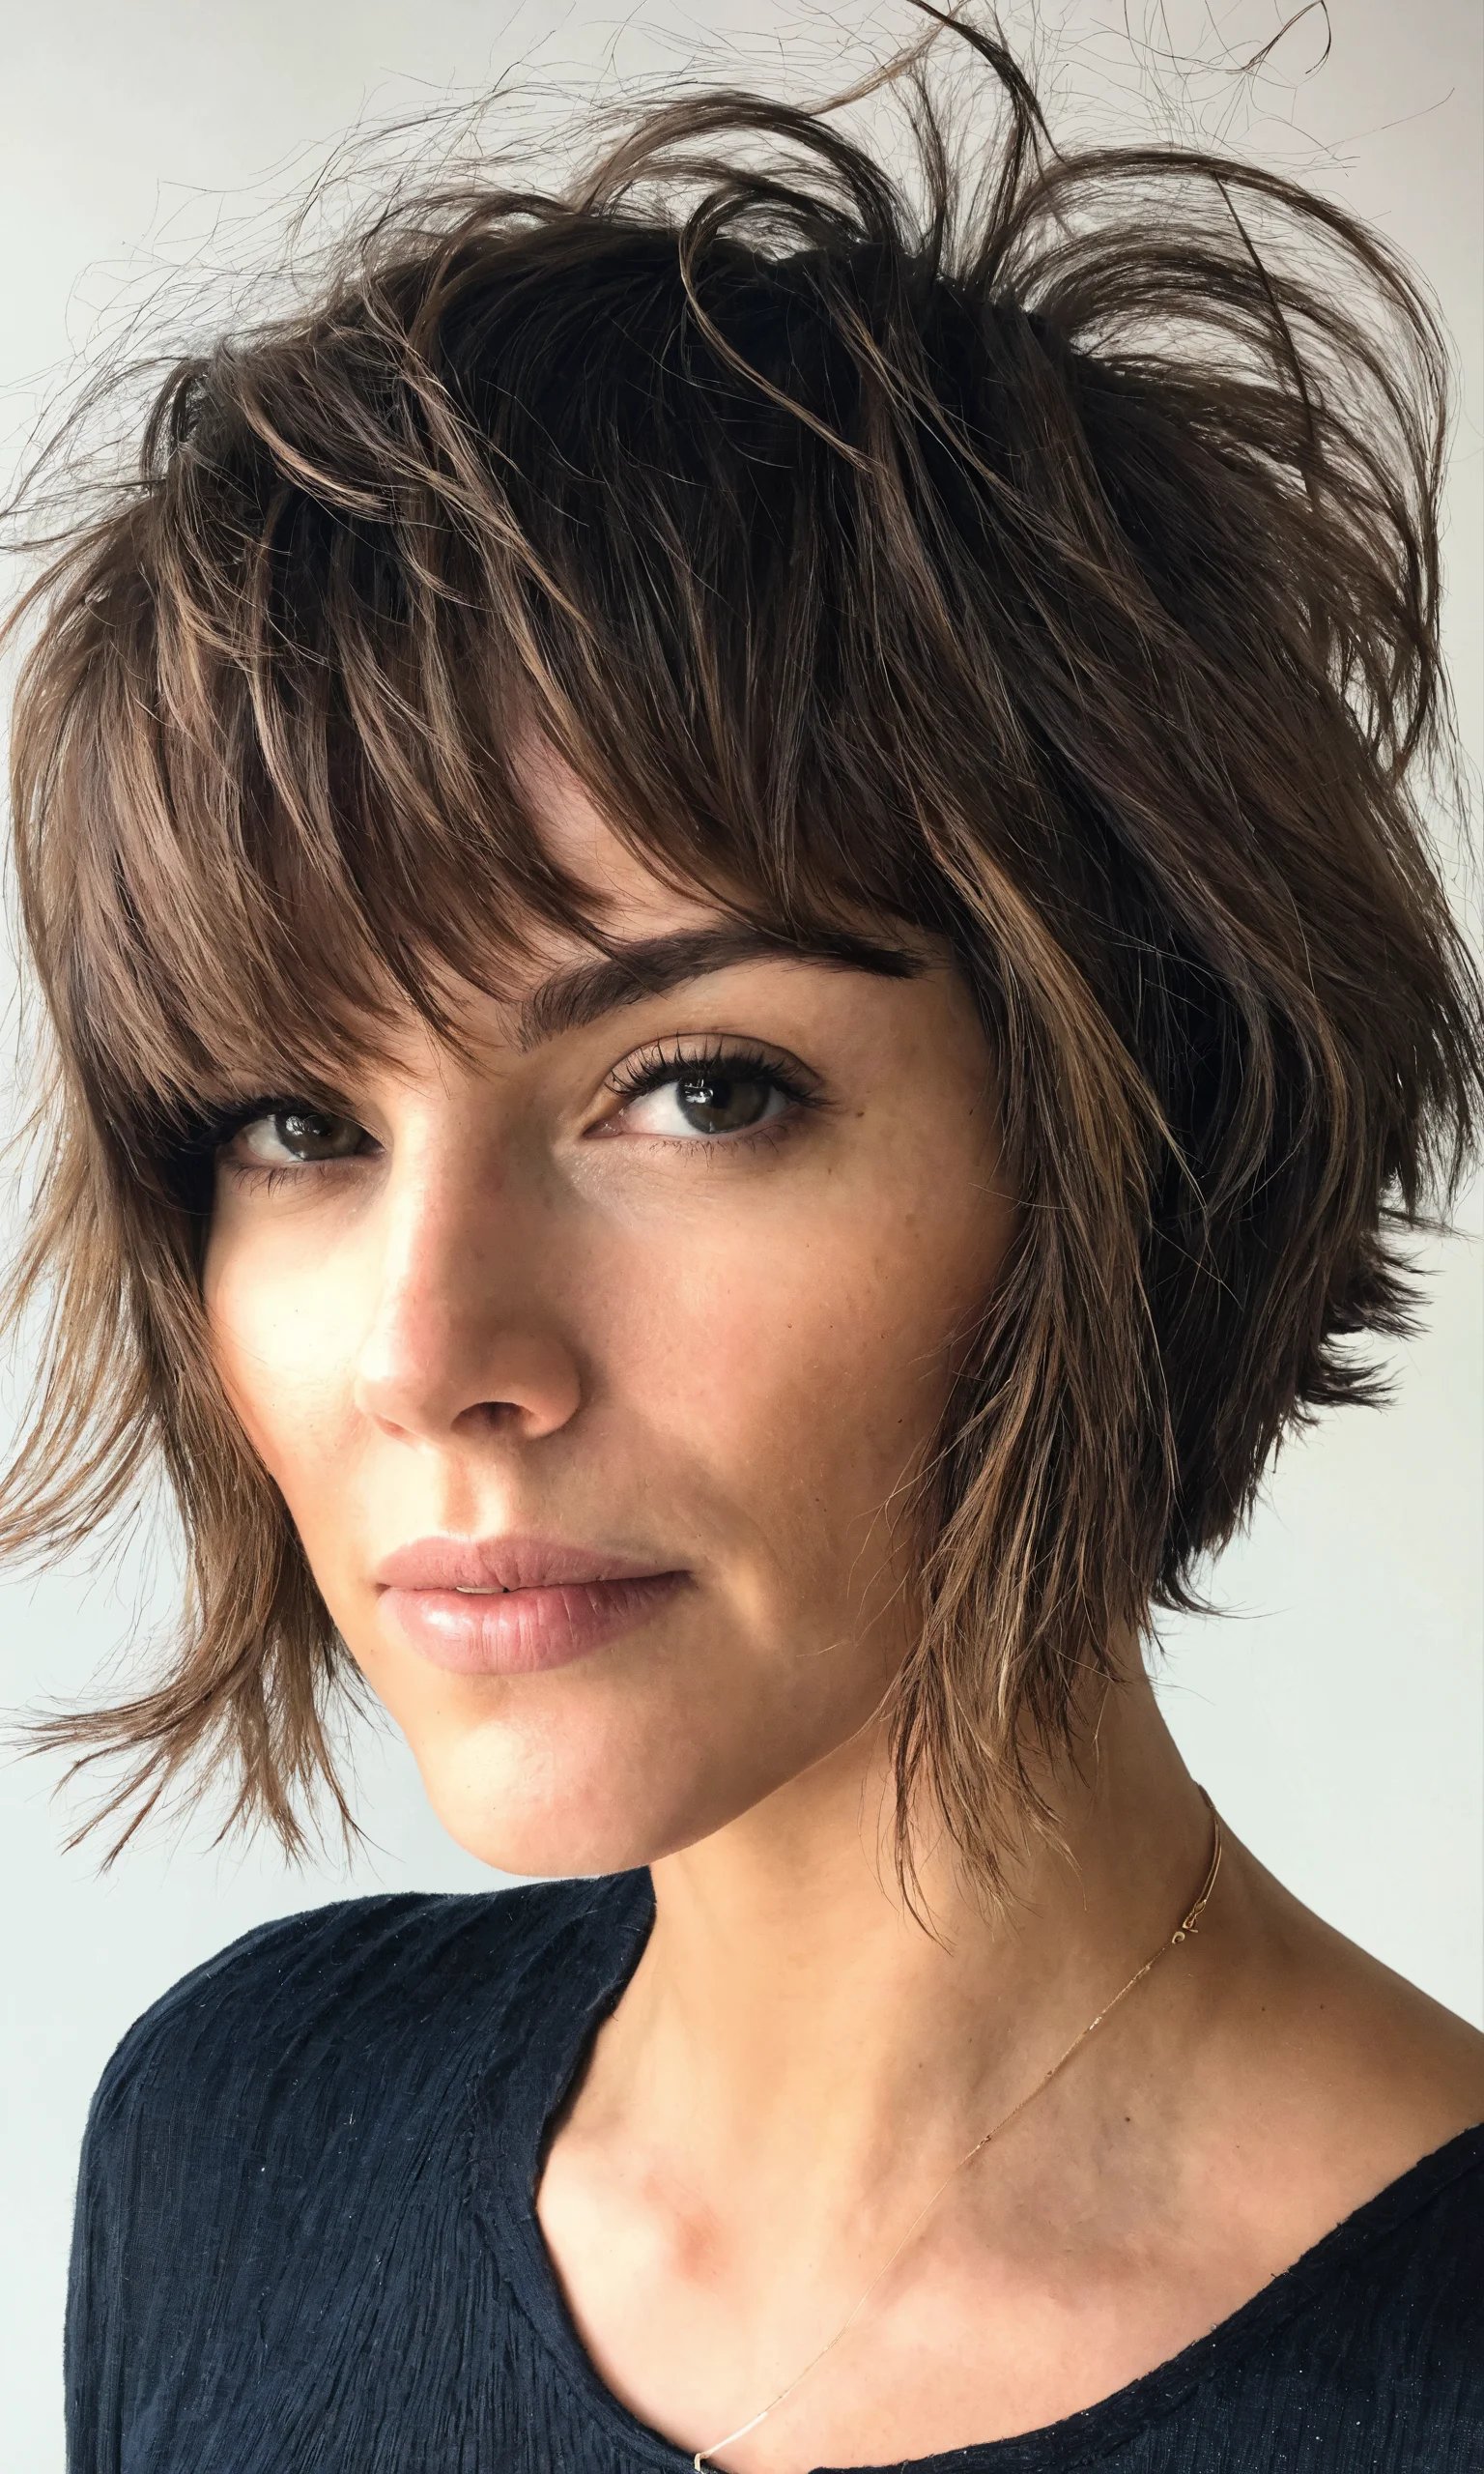 21 İdeas For Summer Haircuts With Bangs